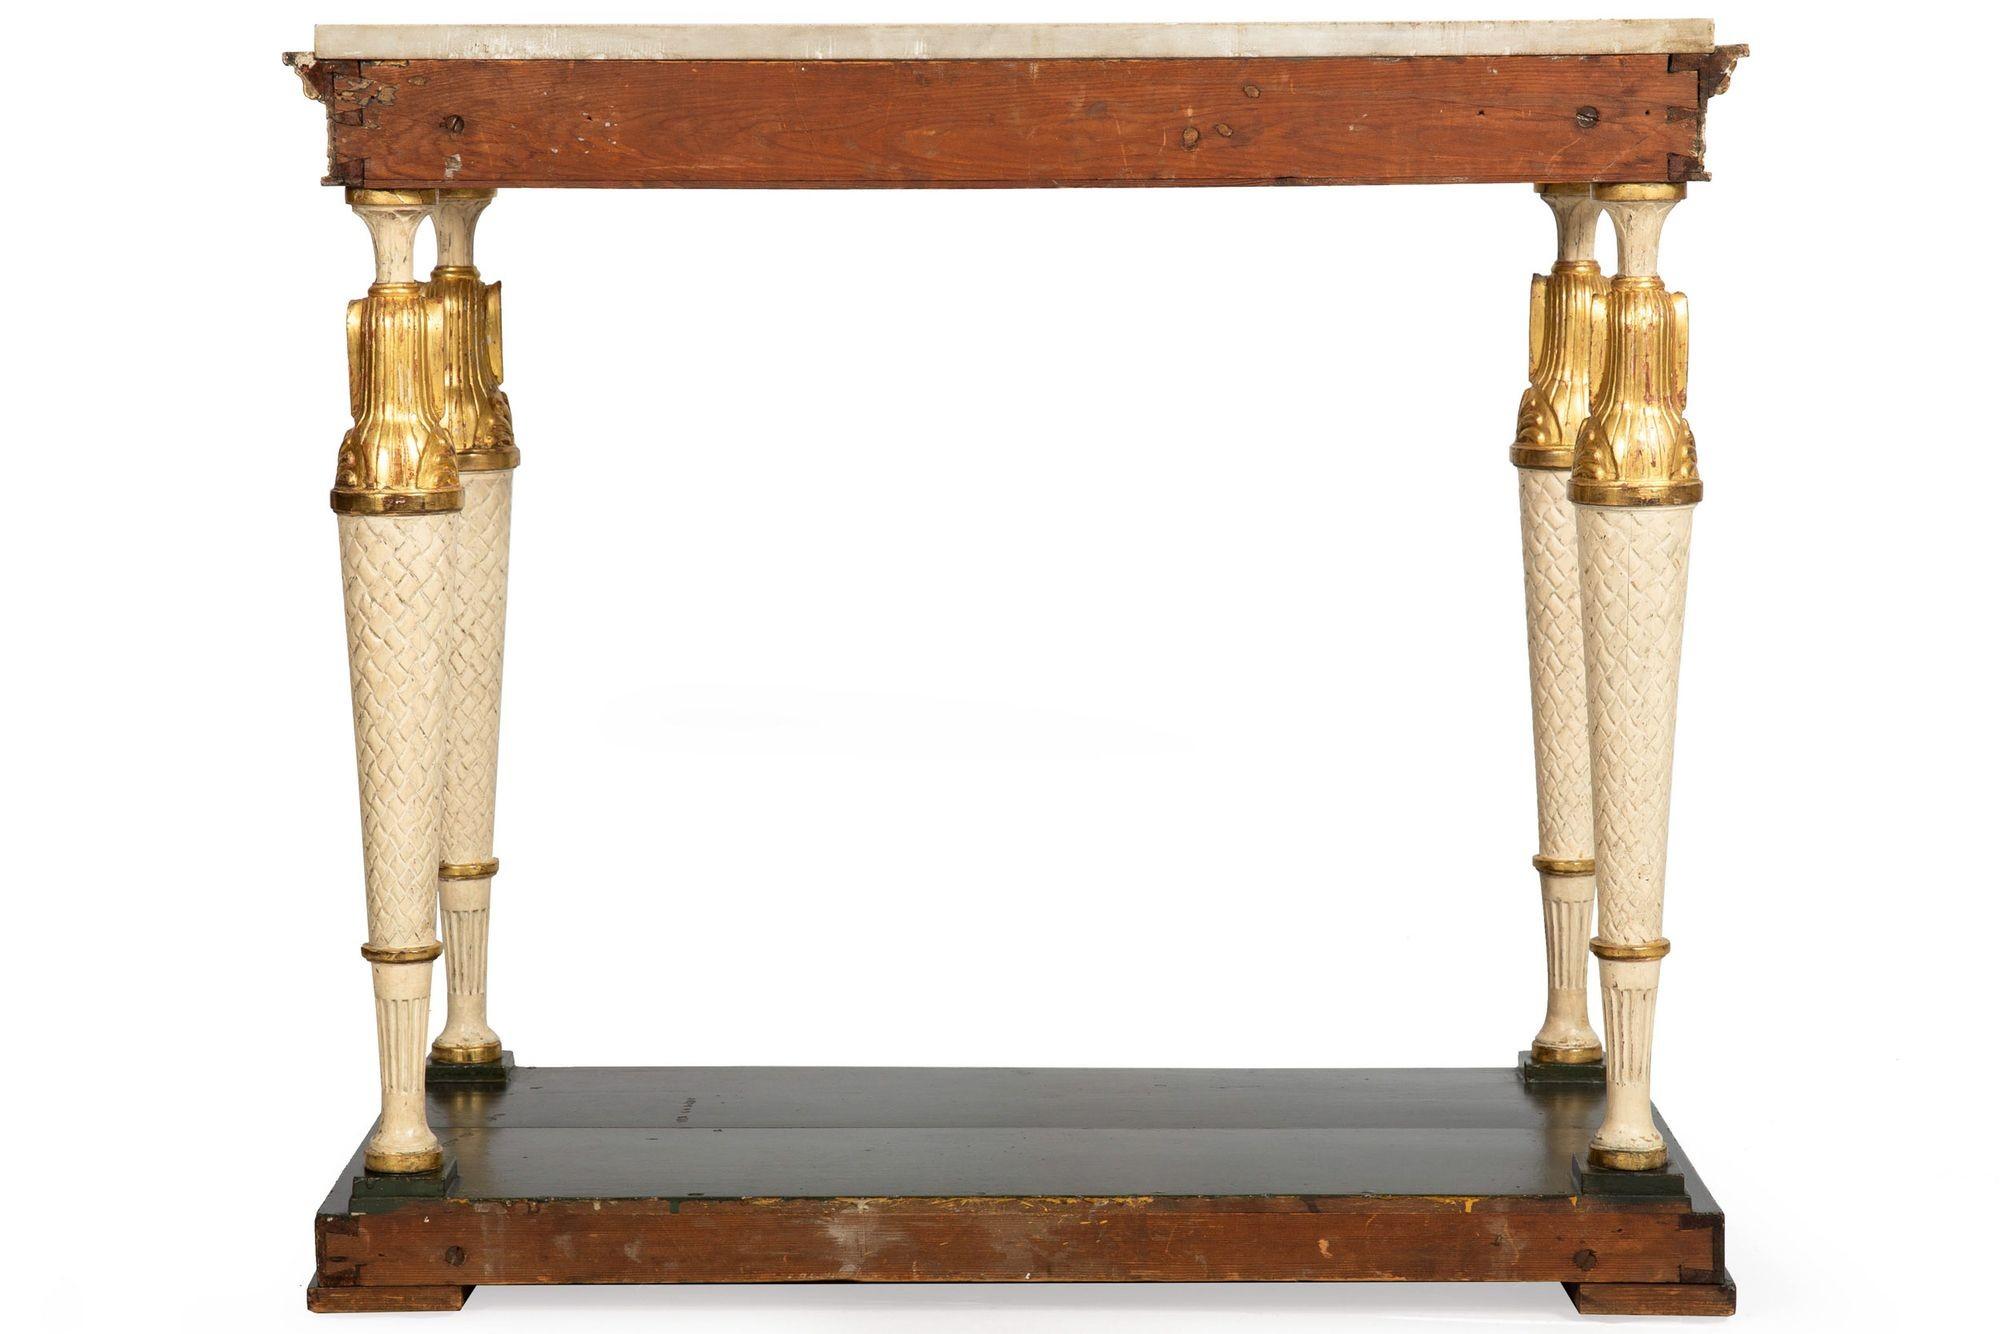 Swedish Gustavian Marble Top Egyptian Pharaoh Mask Pier Table circa 1820 In Good Condition For Sale In Shippensburg, PA